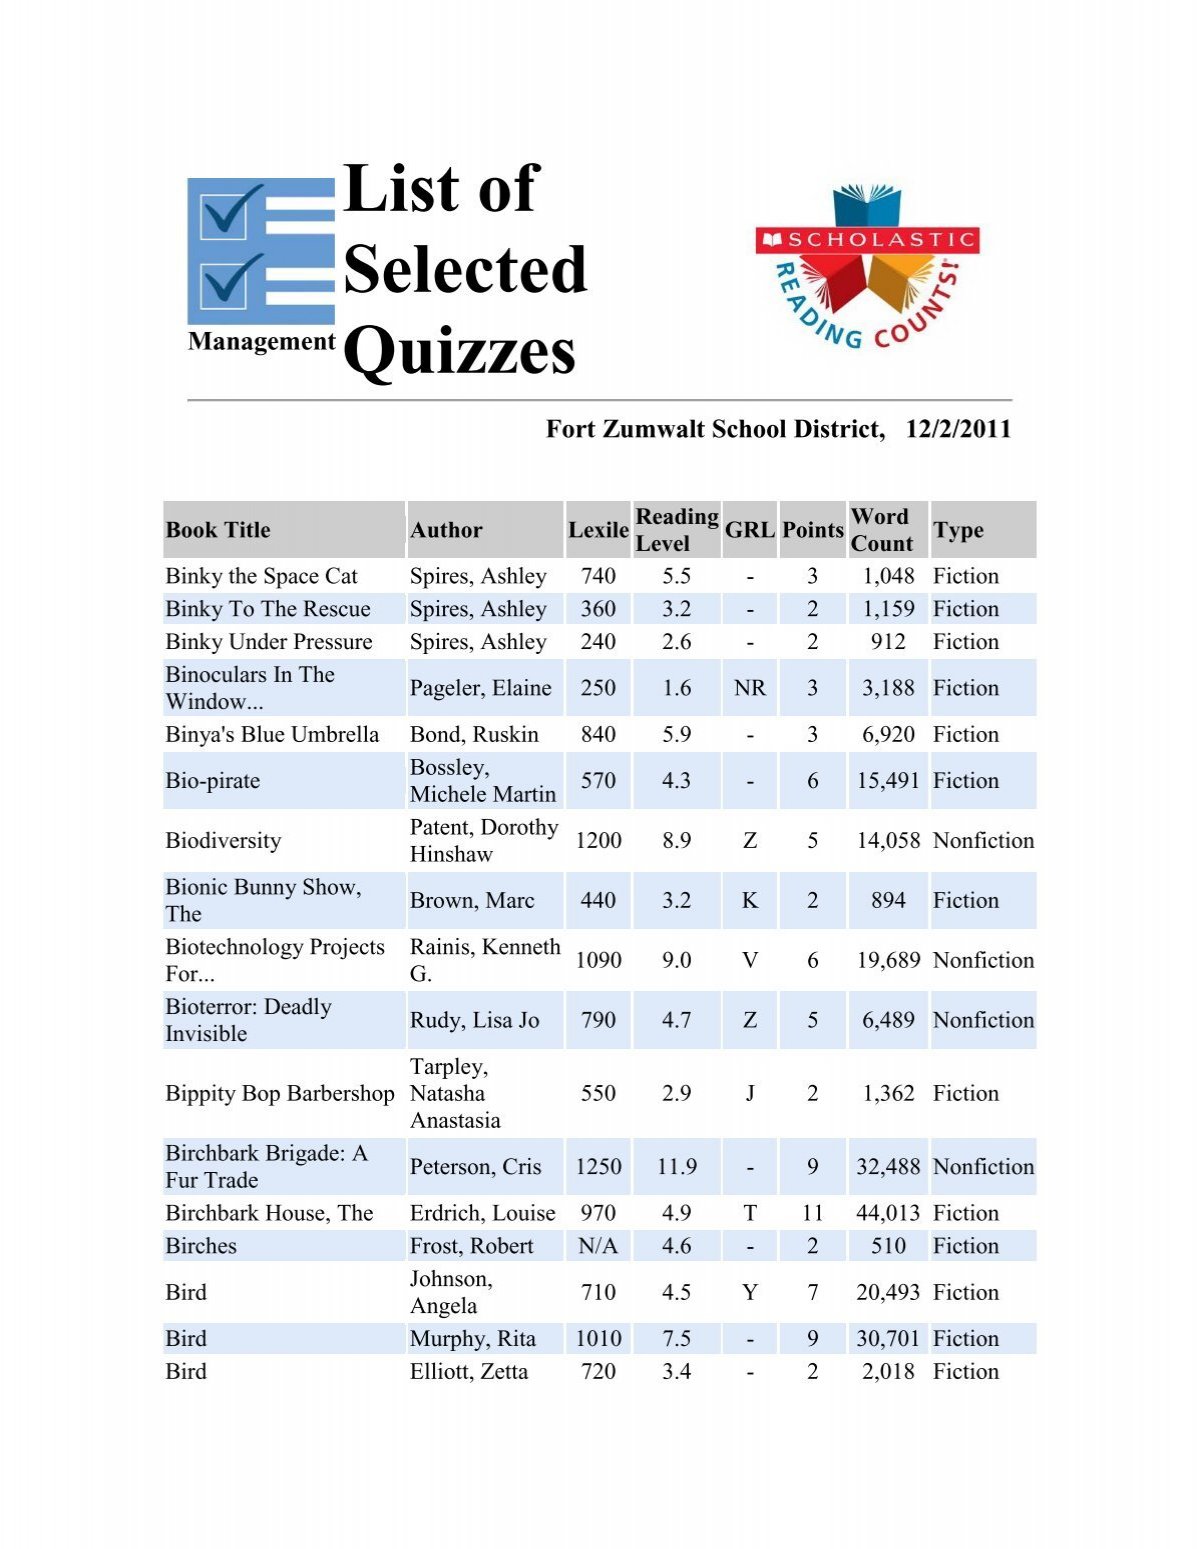 Scholastic: List of Selected Quizzes - Ostmann Elementary PTO